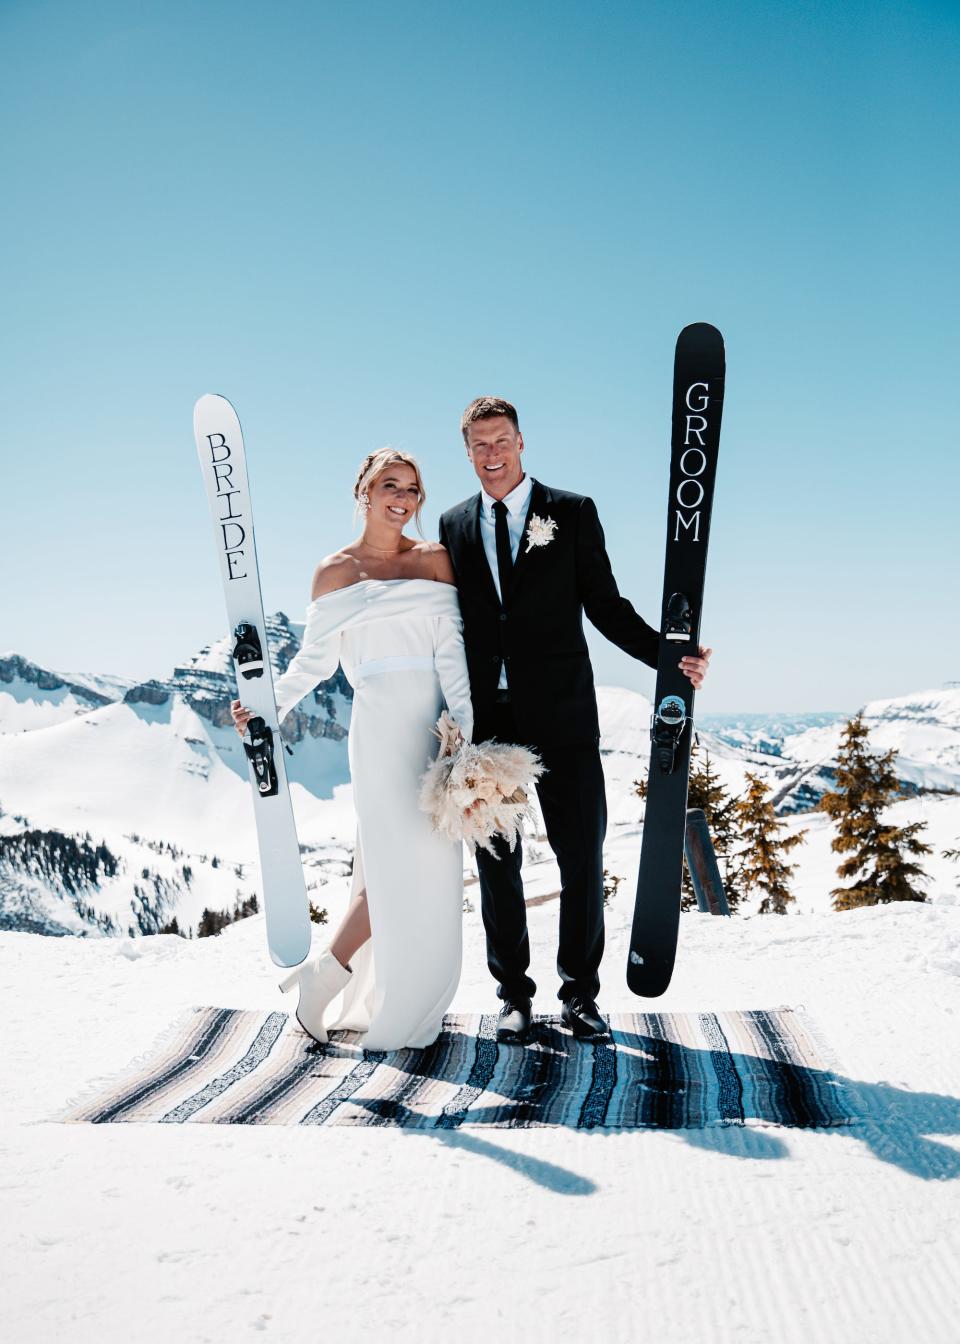 A bride and groom pose for a photo on top of a snowy mountain holding custom skis.